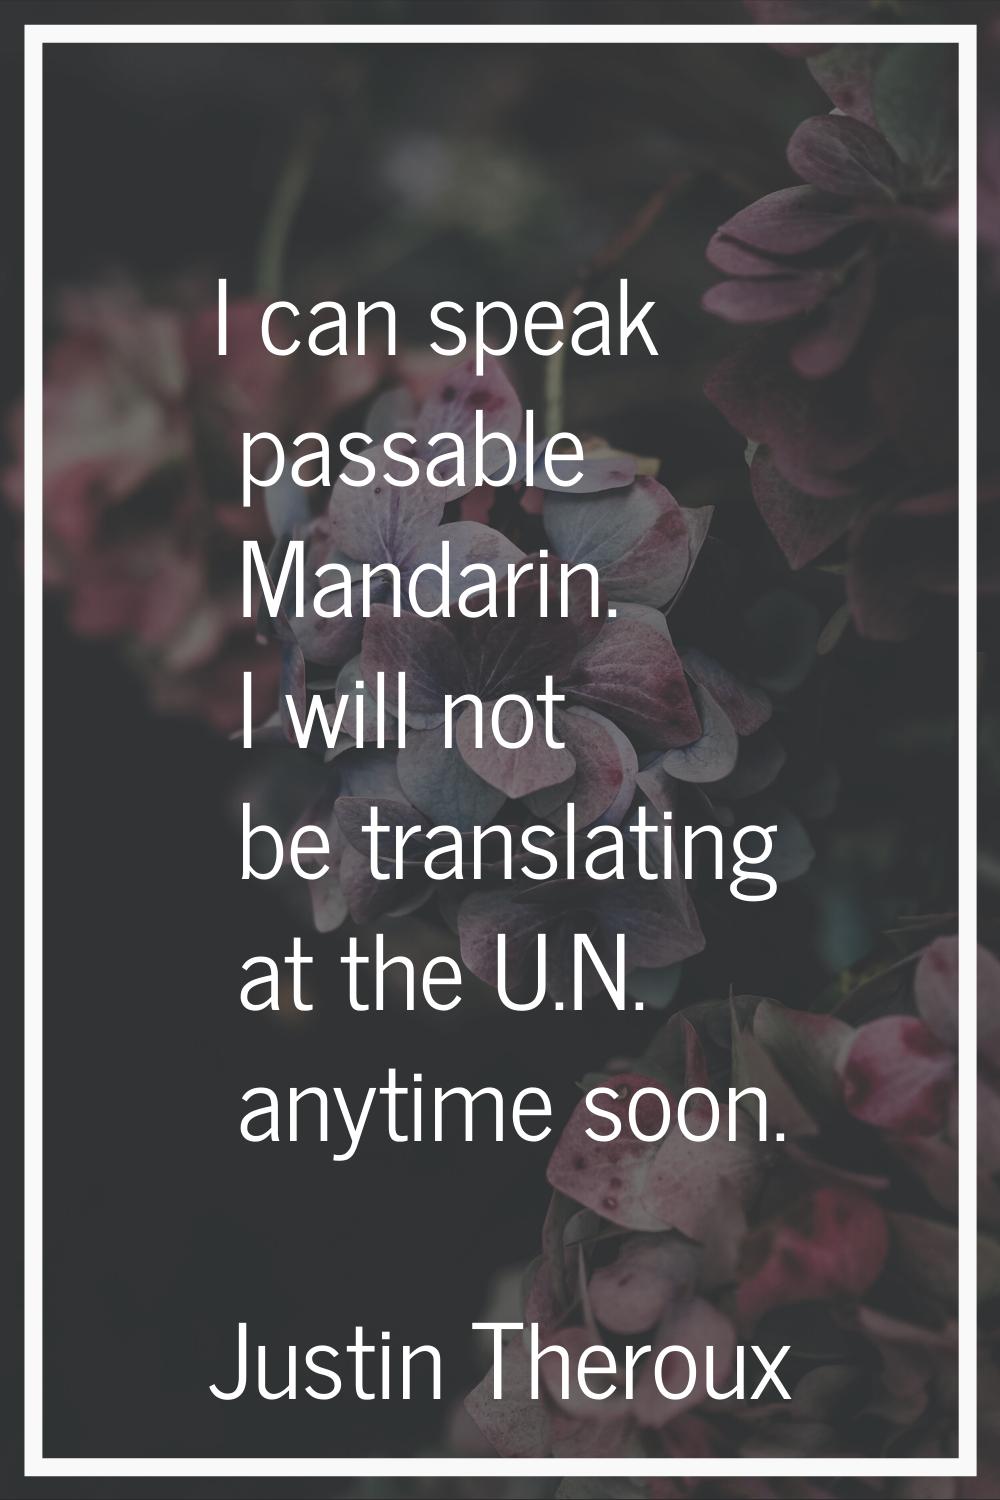 I can speak passable Mandarin. I will not be translating at the U.N. anytime soon.